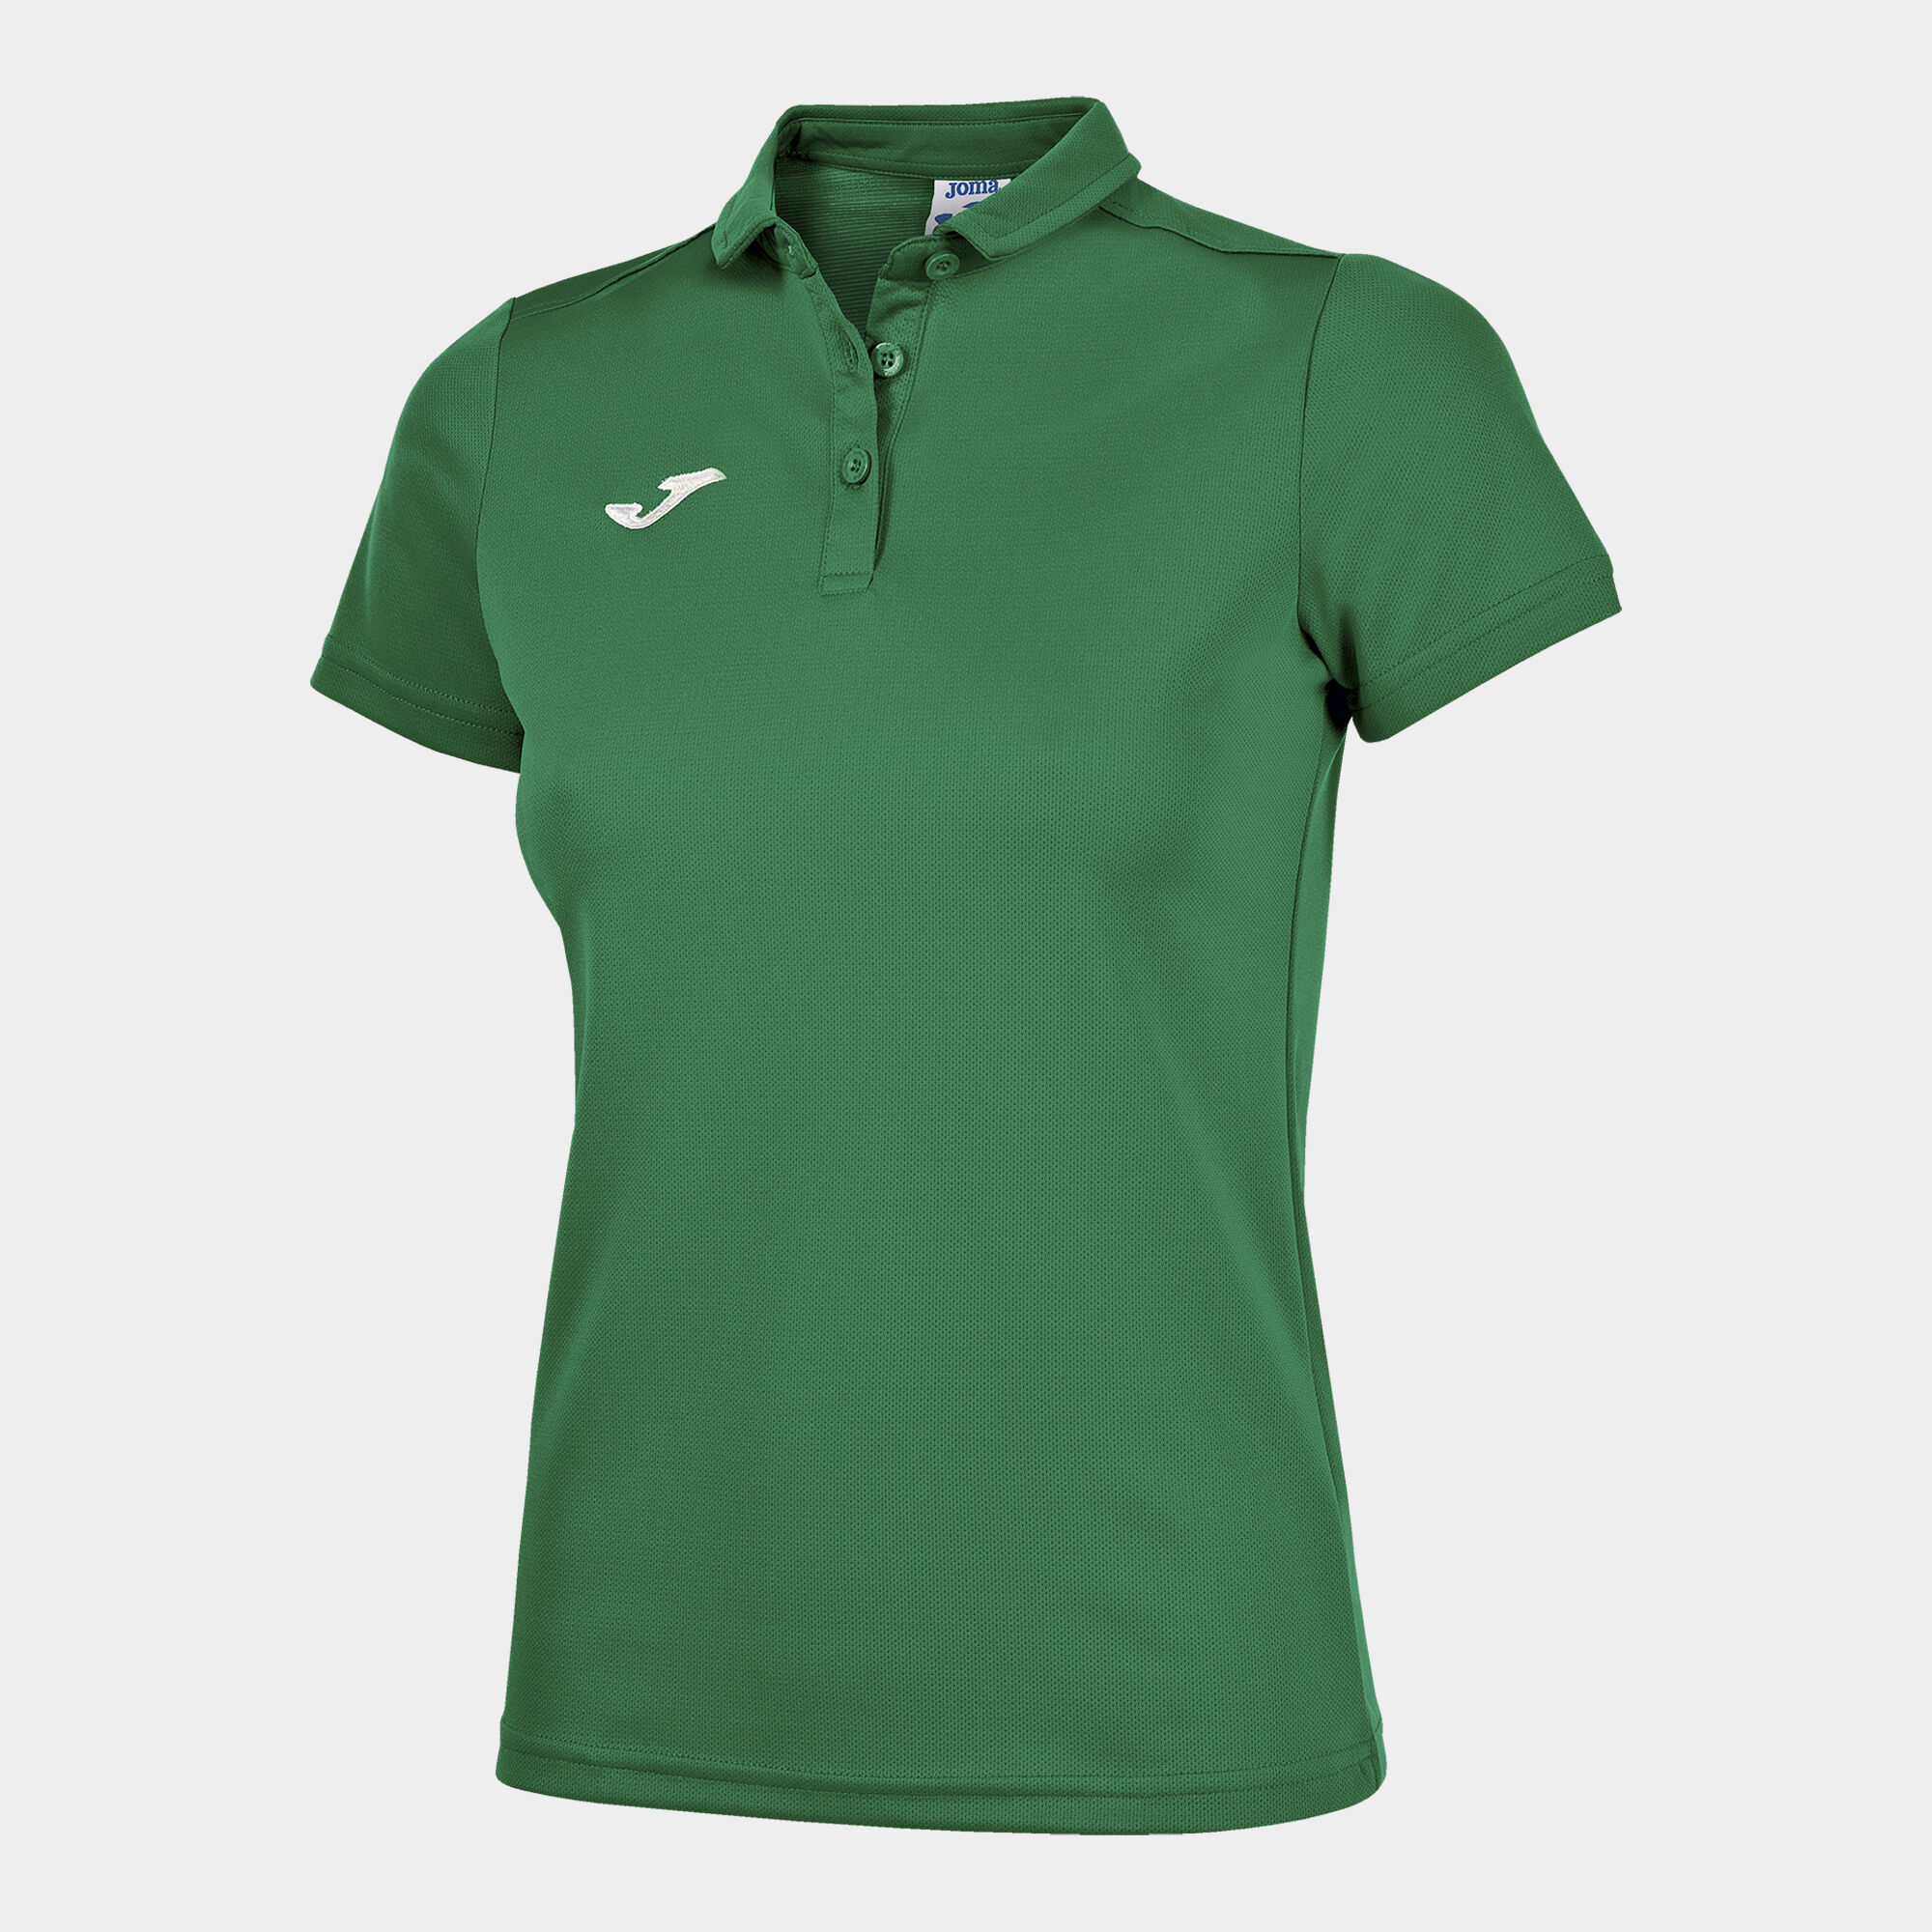 POLO MANCHES COURTES FEMME HOBBY VERT